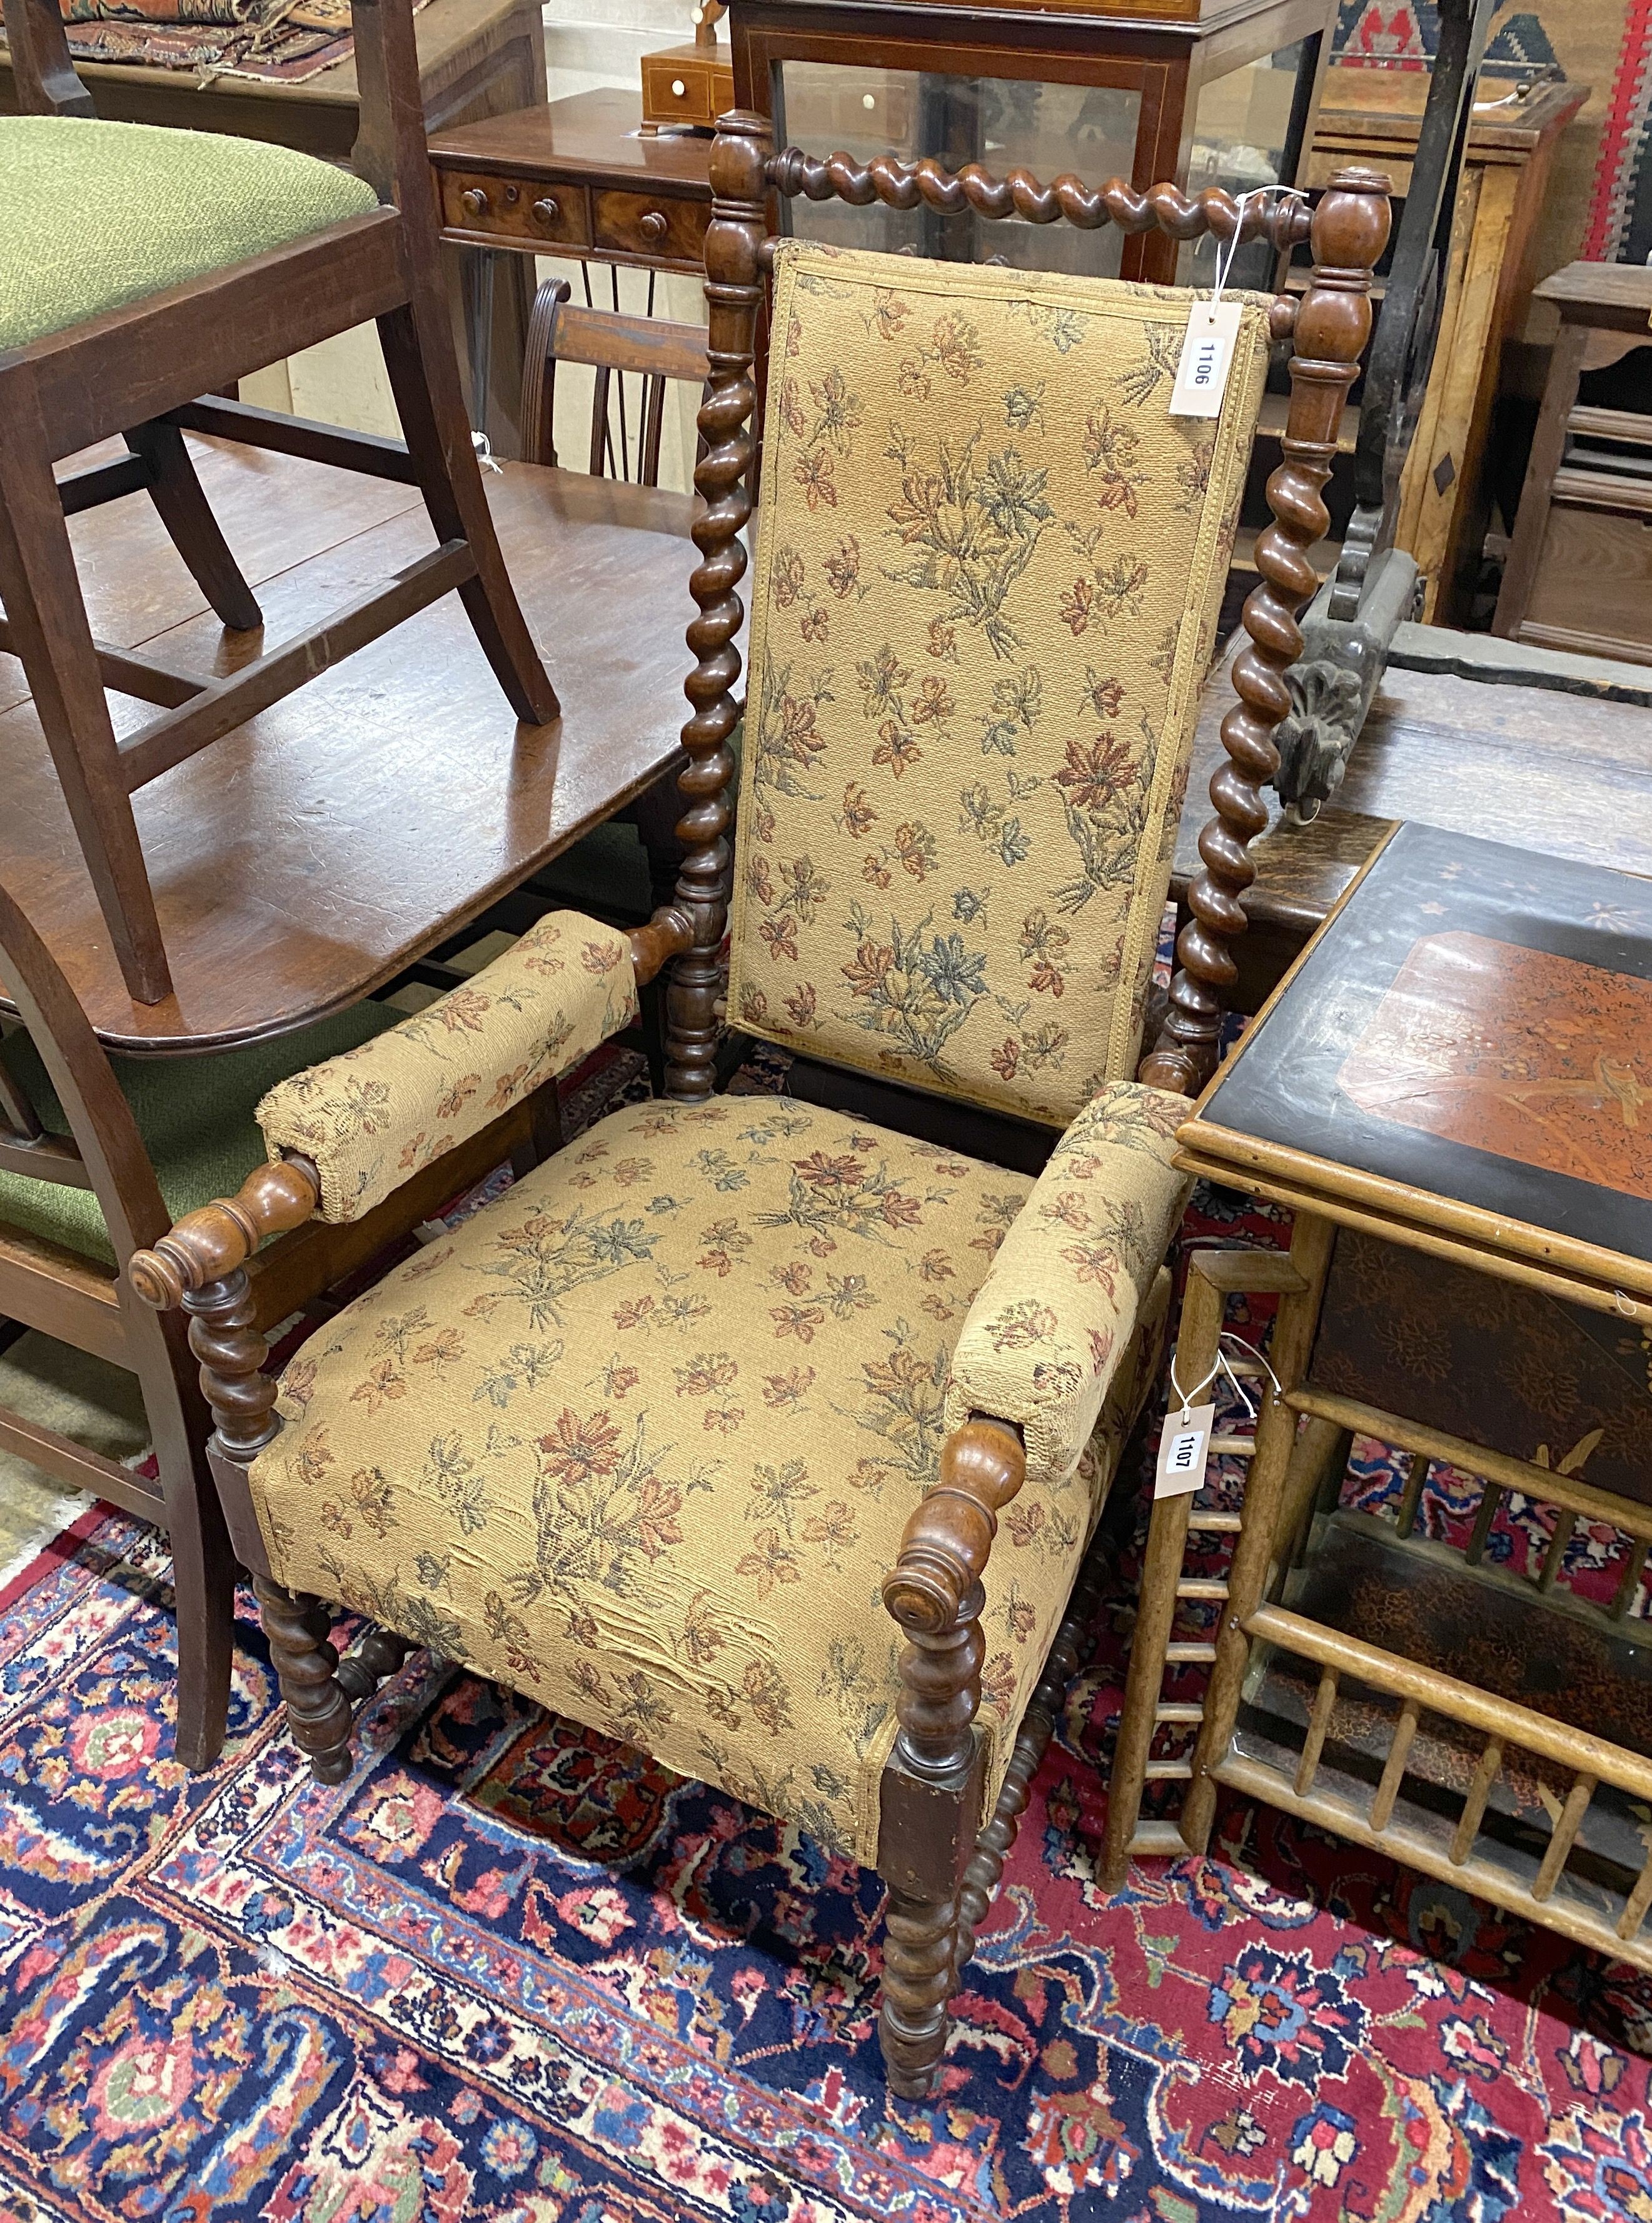 A Victorian spiral turned upholstered open armchair, width 60cm, depth 58cm, height 117cm